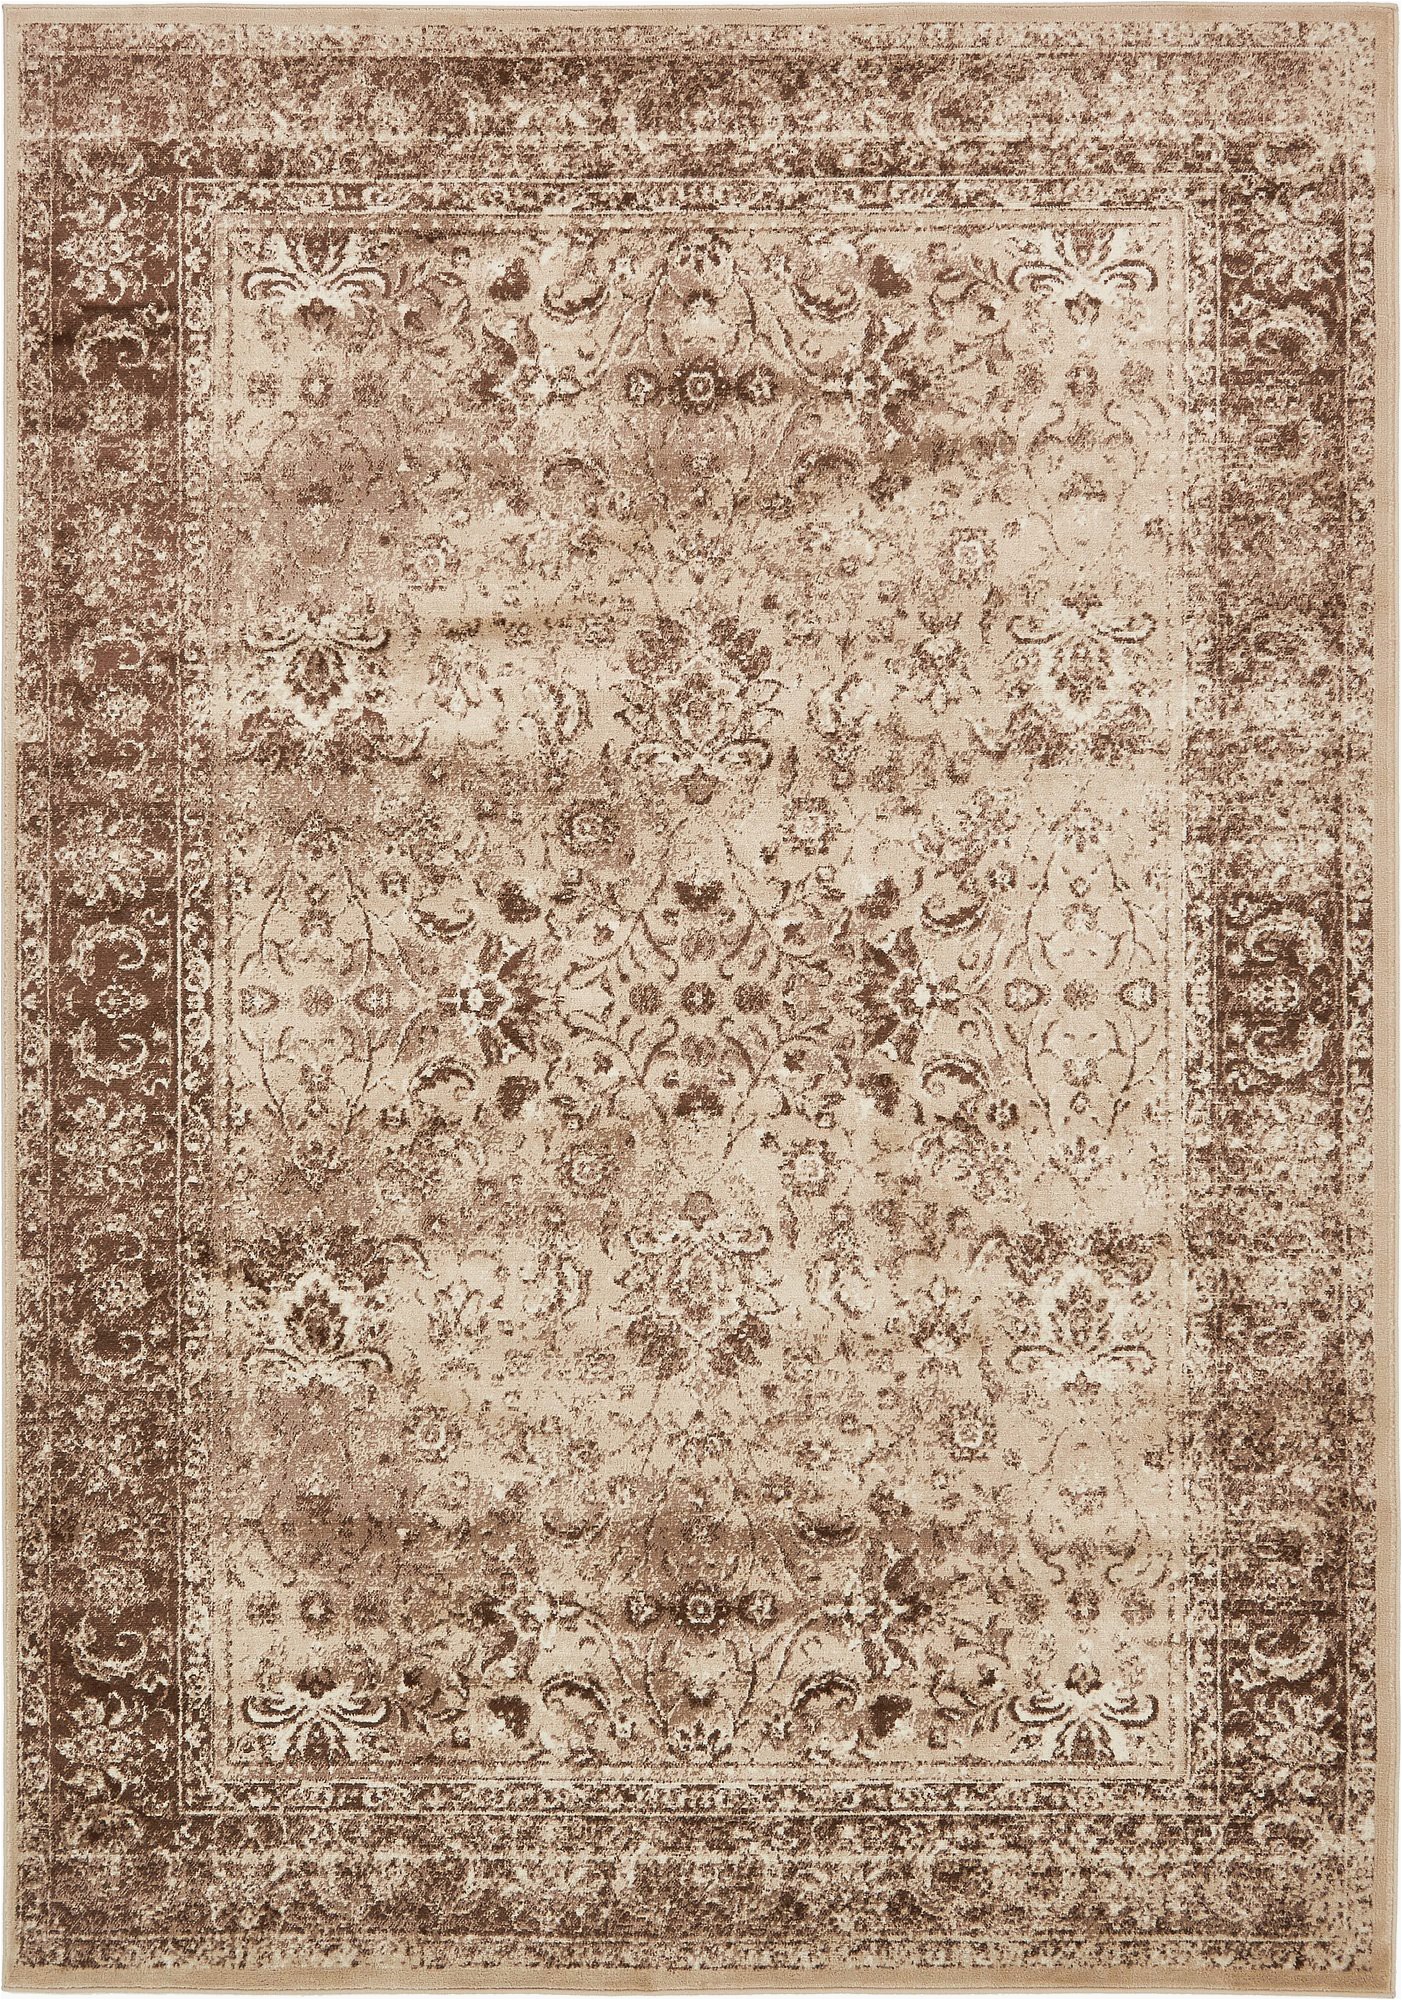 4620 Distressed Cream area Rug Unique Loom Imperial Collection Modern Traditional Vintage Distressed Cream area Rug 7 0 X 10 0